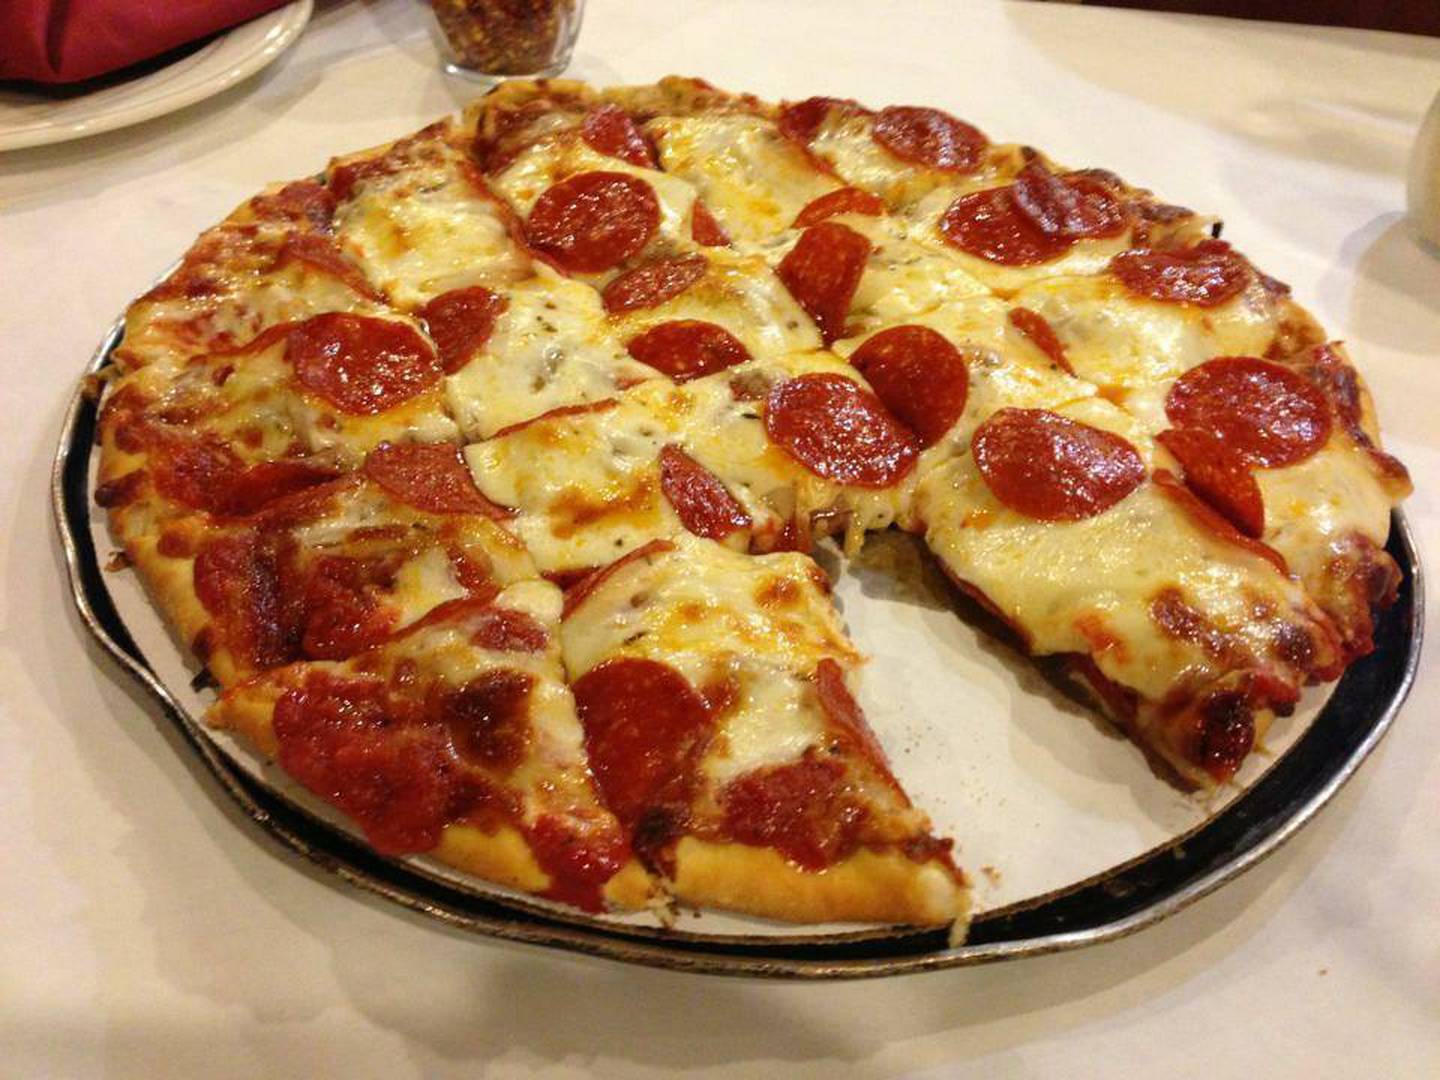 Palermo's of 63rd Frankfort Pizza and Restaurant was named one of the best pizza places in Will County by our readers in 2021. (Photo from Palermo's of 63rd Frankfort Facebook page)